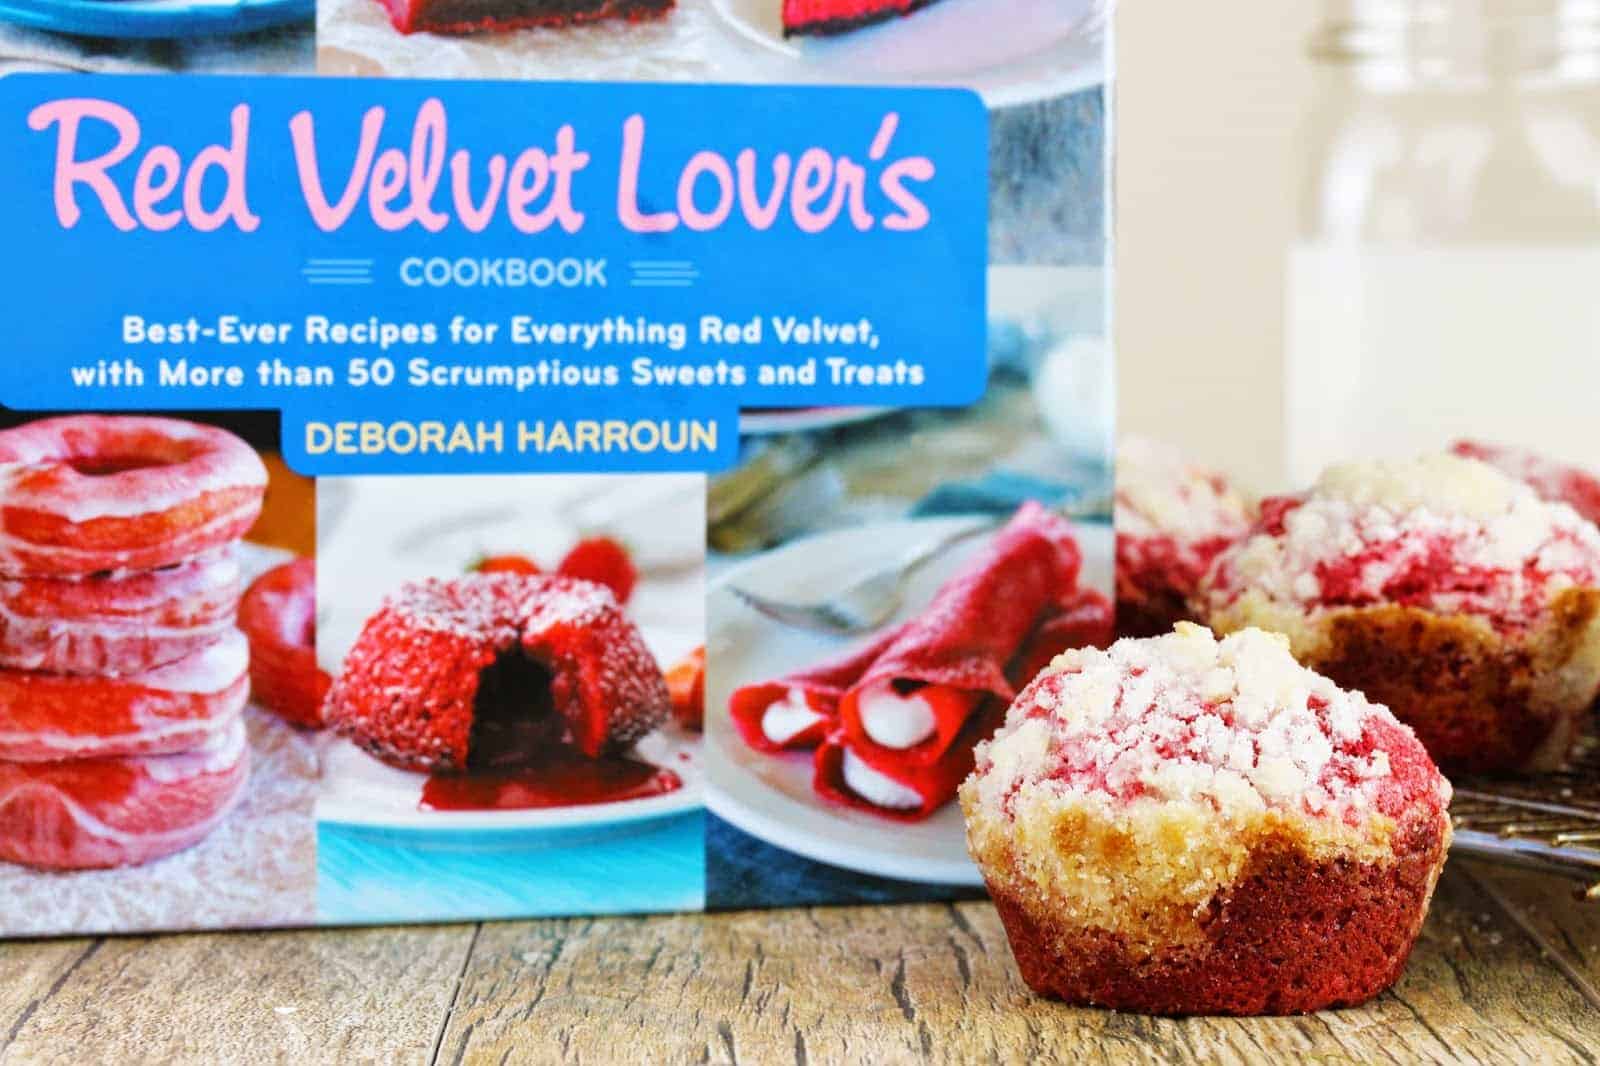 Cream cheese muffin sitting next to the Velvet Lover's cookbook